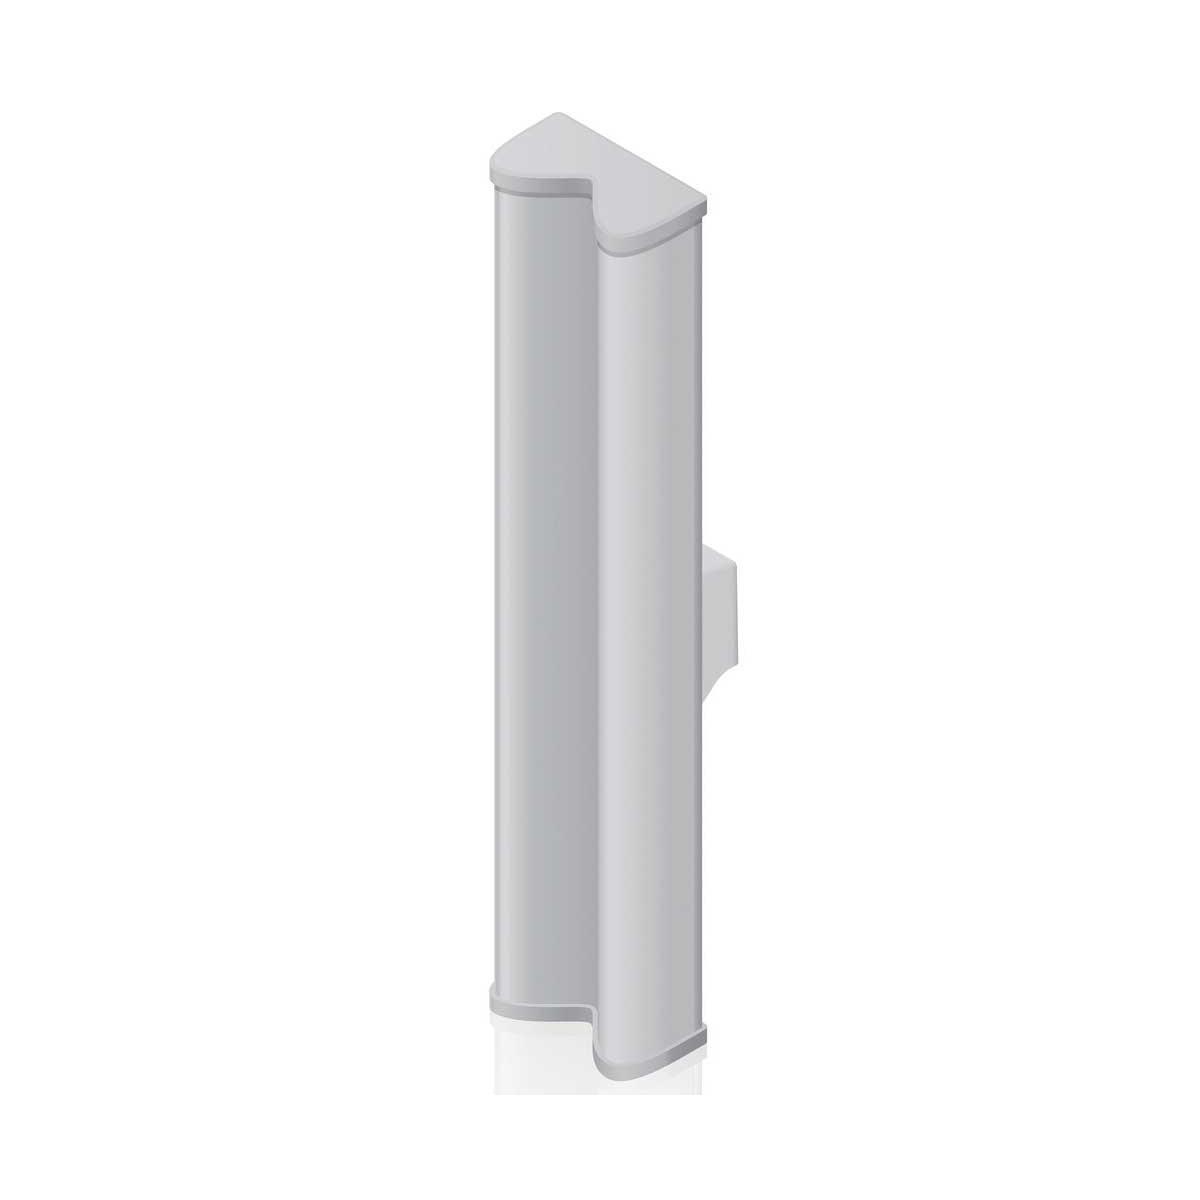 Image of Ubiquiti Networks airMAX 2.4GHz 2x2 MIMO Sector Antenna